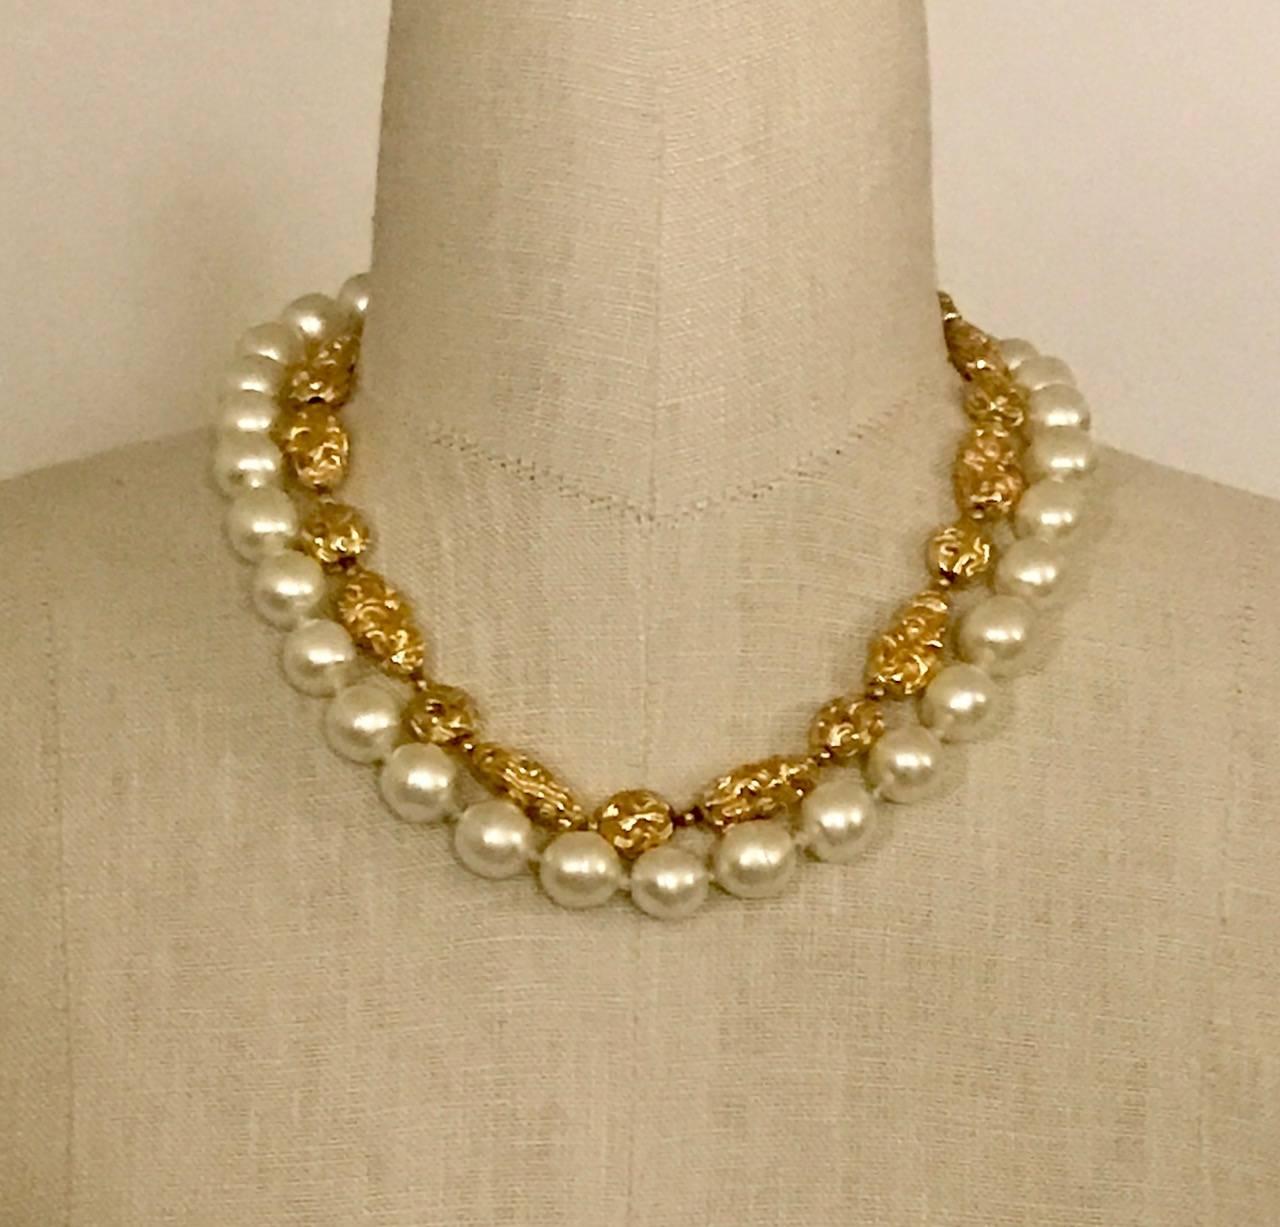 Very rare Chanel vintage 1970's necklace featuring a strand of faux gold nuggets and one of faux pearls. Spring ring closure.

Measures approximately 16